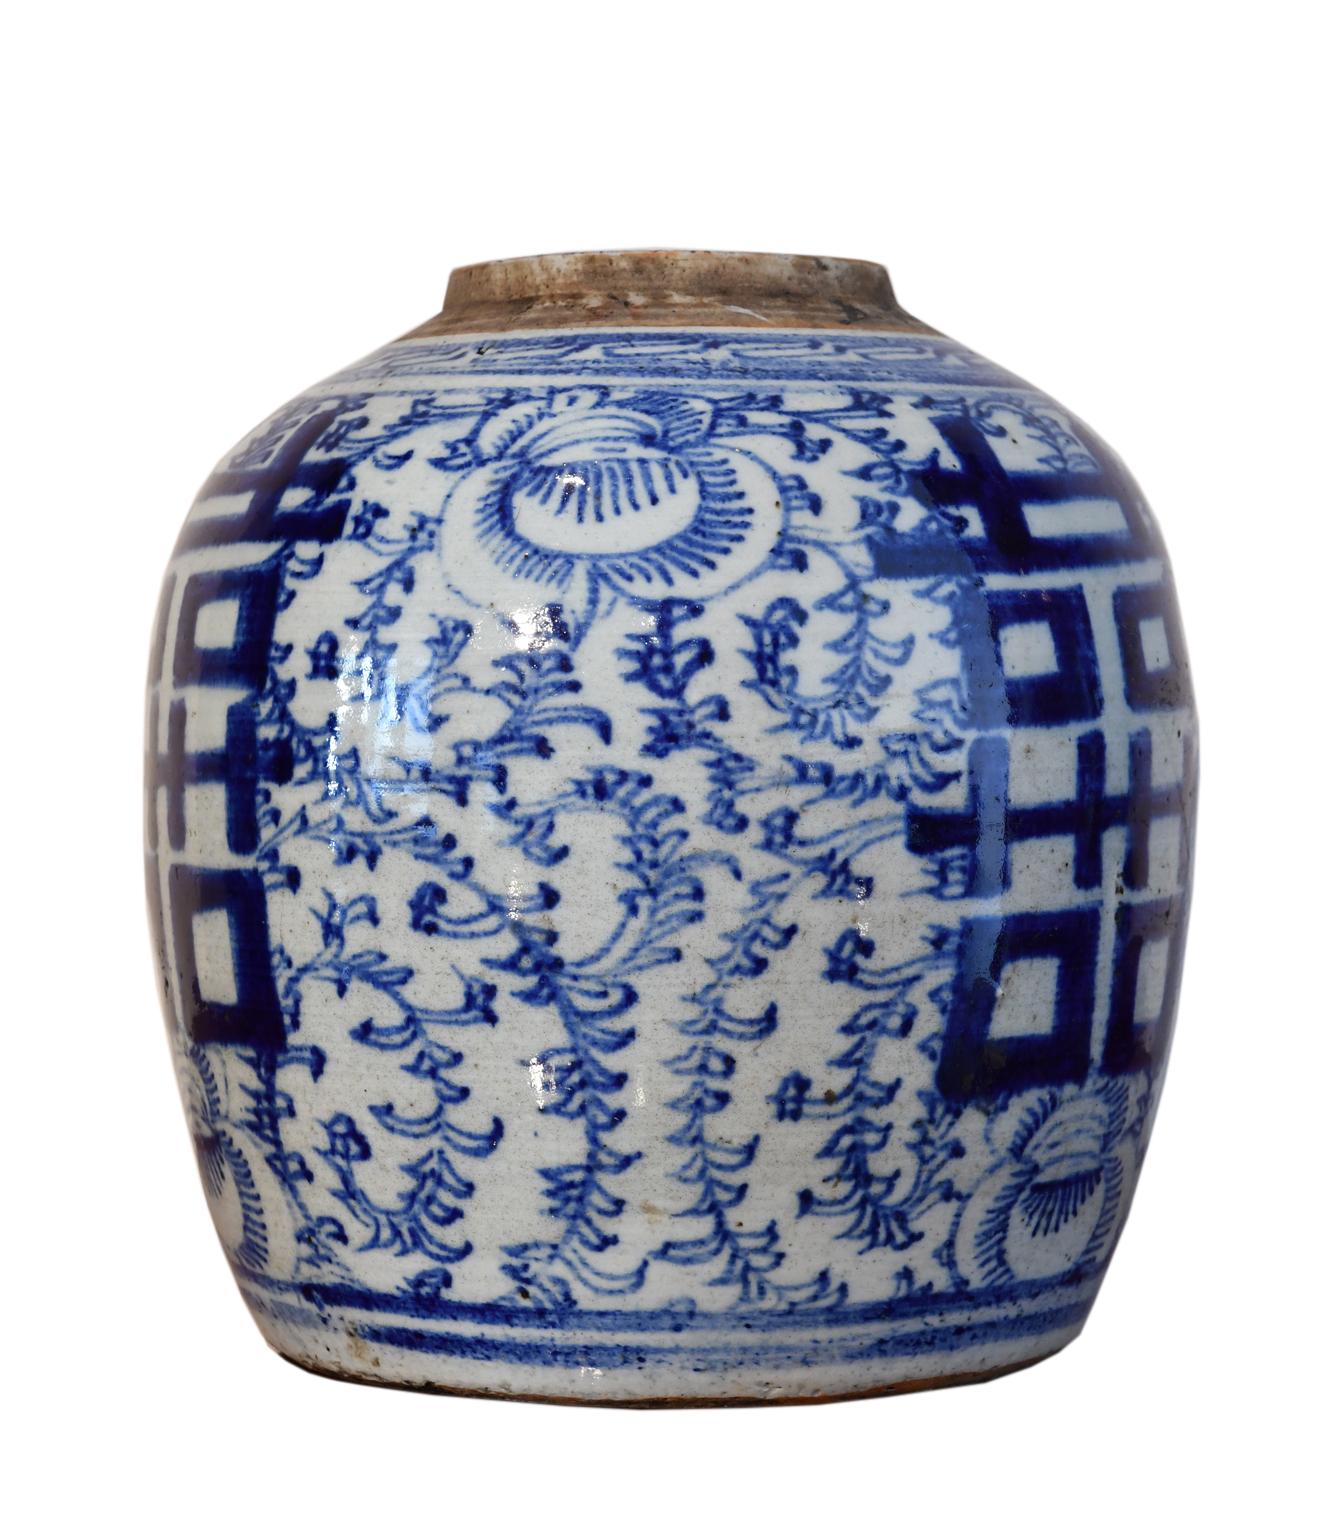 A Qing Chinese porcelain jar with hand-painted cobalt blue decoration of 